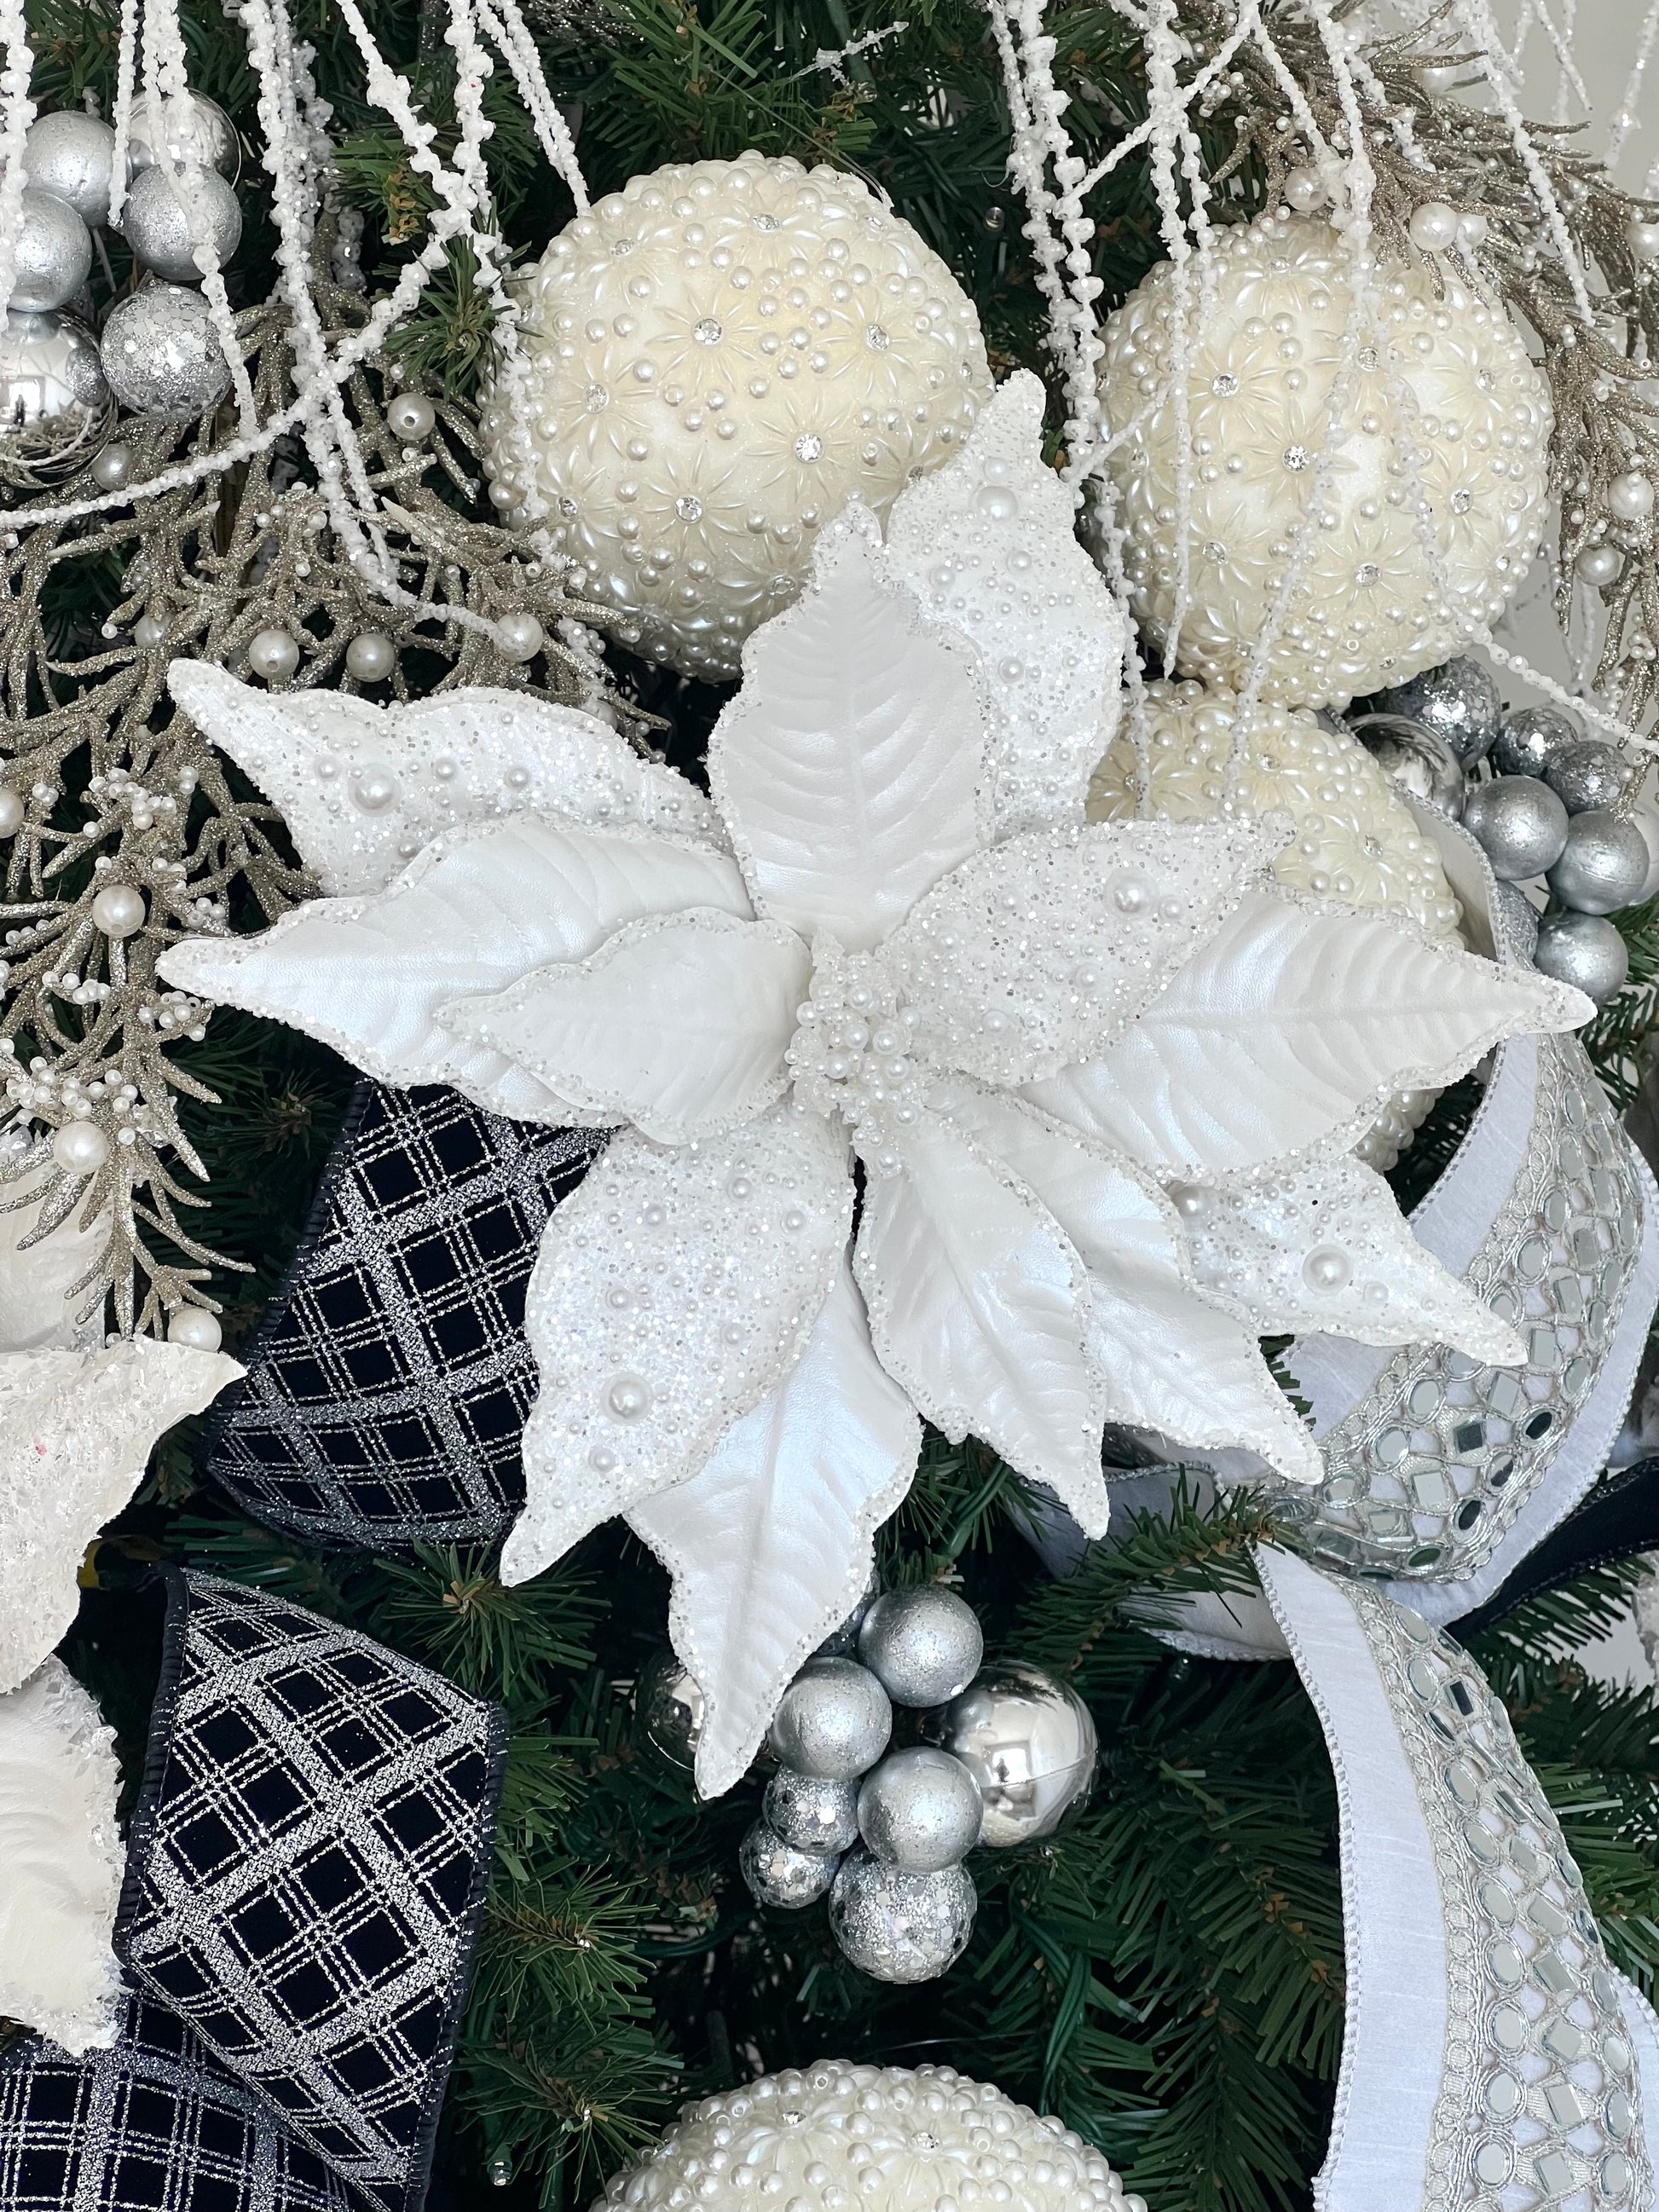 White poinsettia stem with pearl beads dusted across the petals. Glam Christmas decor.